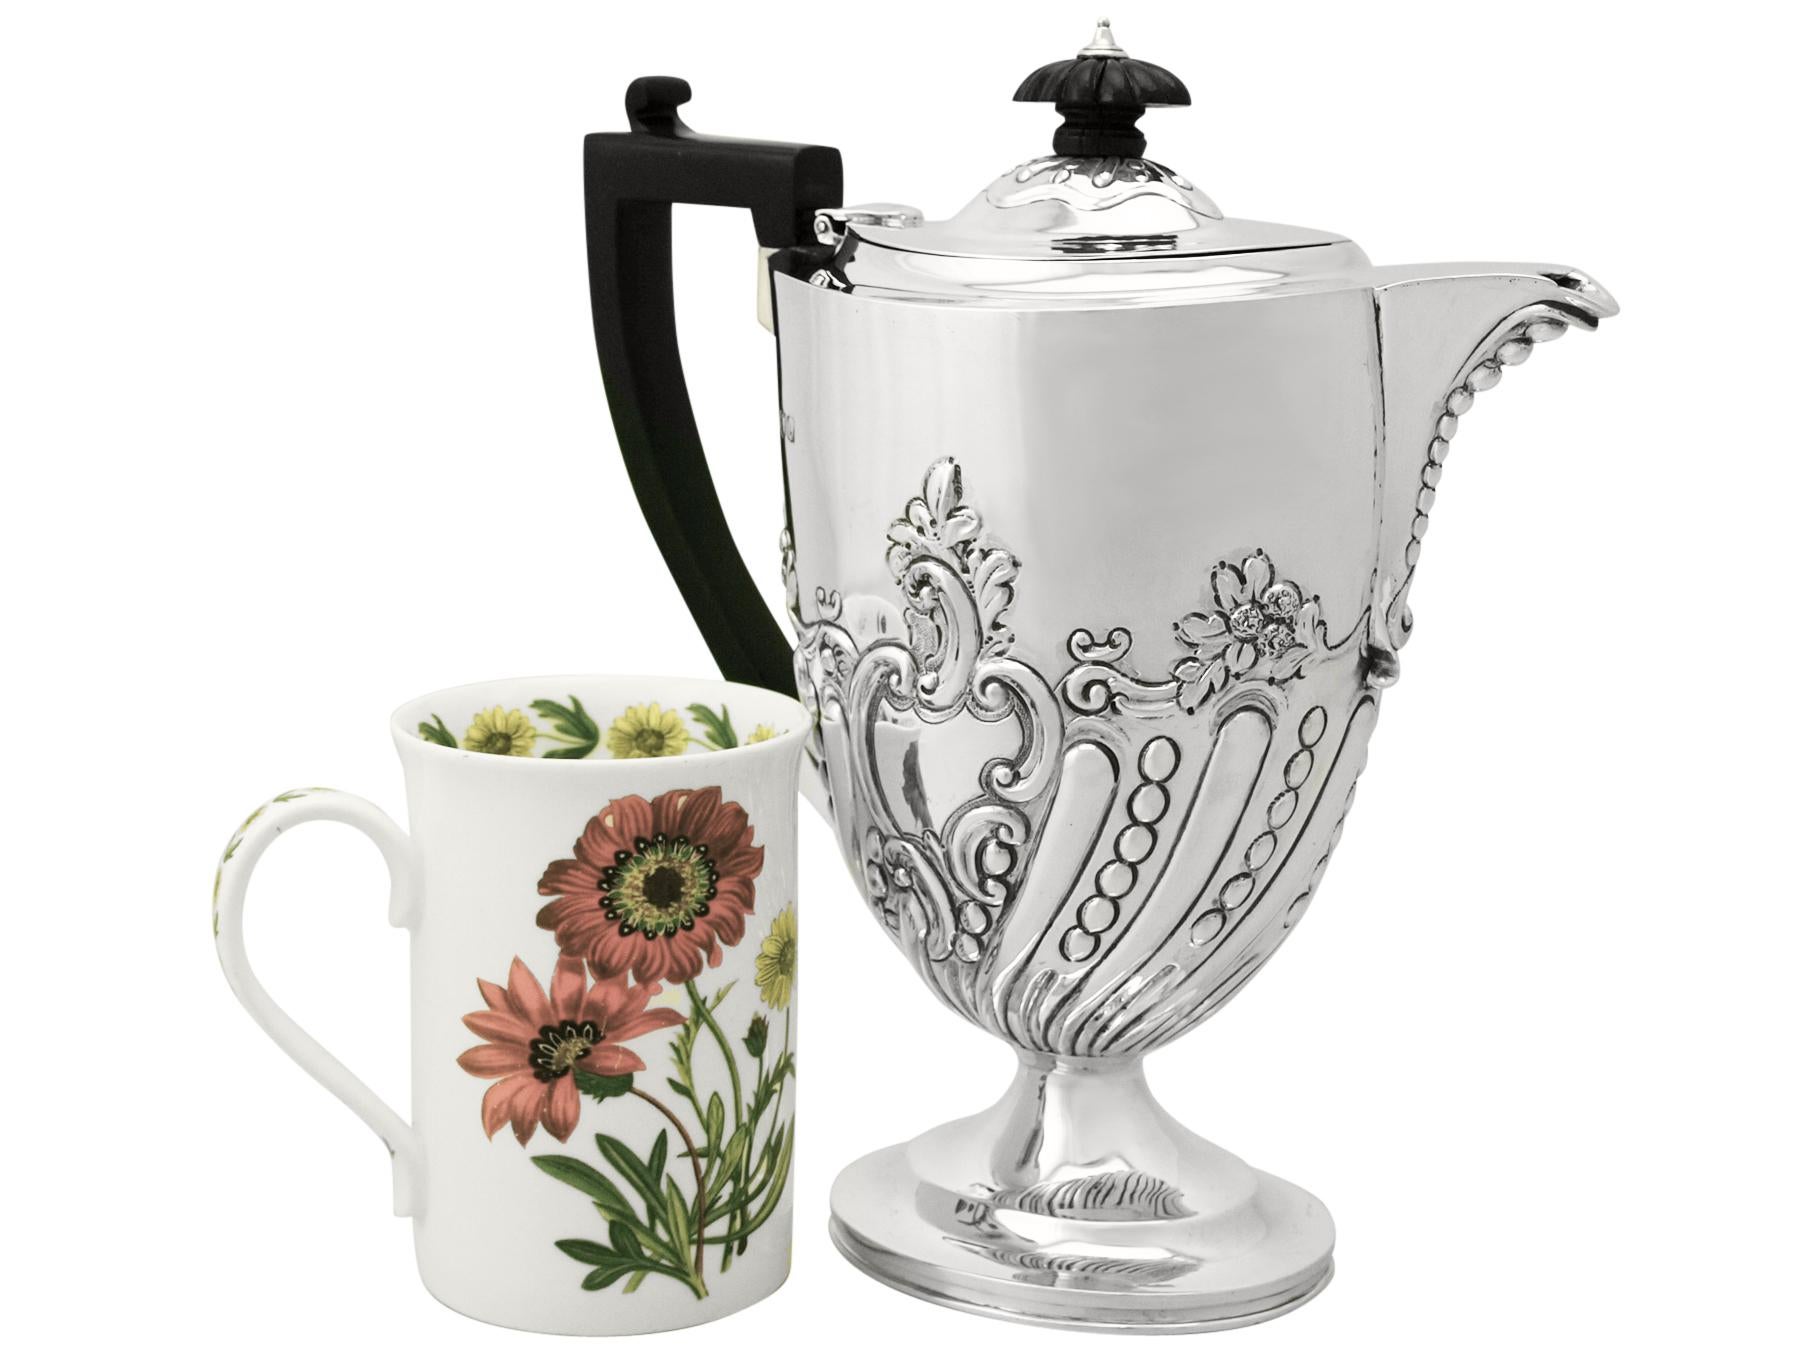 A fine and impressive antique Victorian English sterling silver coffee jug made by Charles Stuart Harris; an addition to our range of silver teaware.

This fine antique Victorian sterling silver coffee jug has an oval rounded Queen Anne form onto